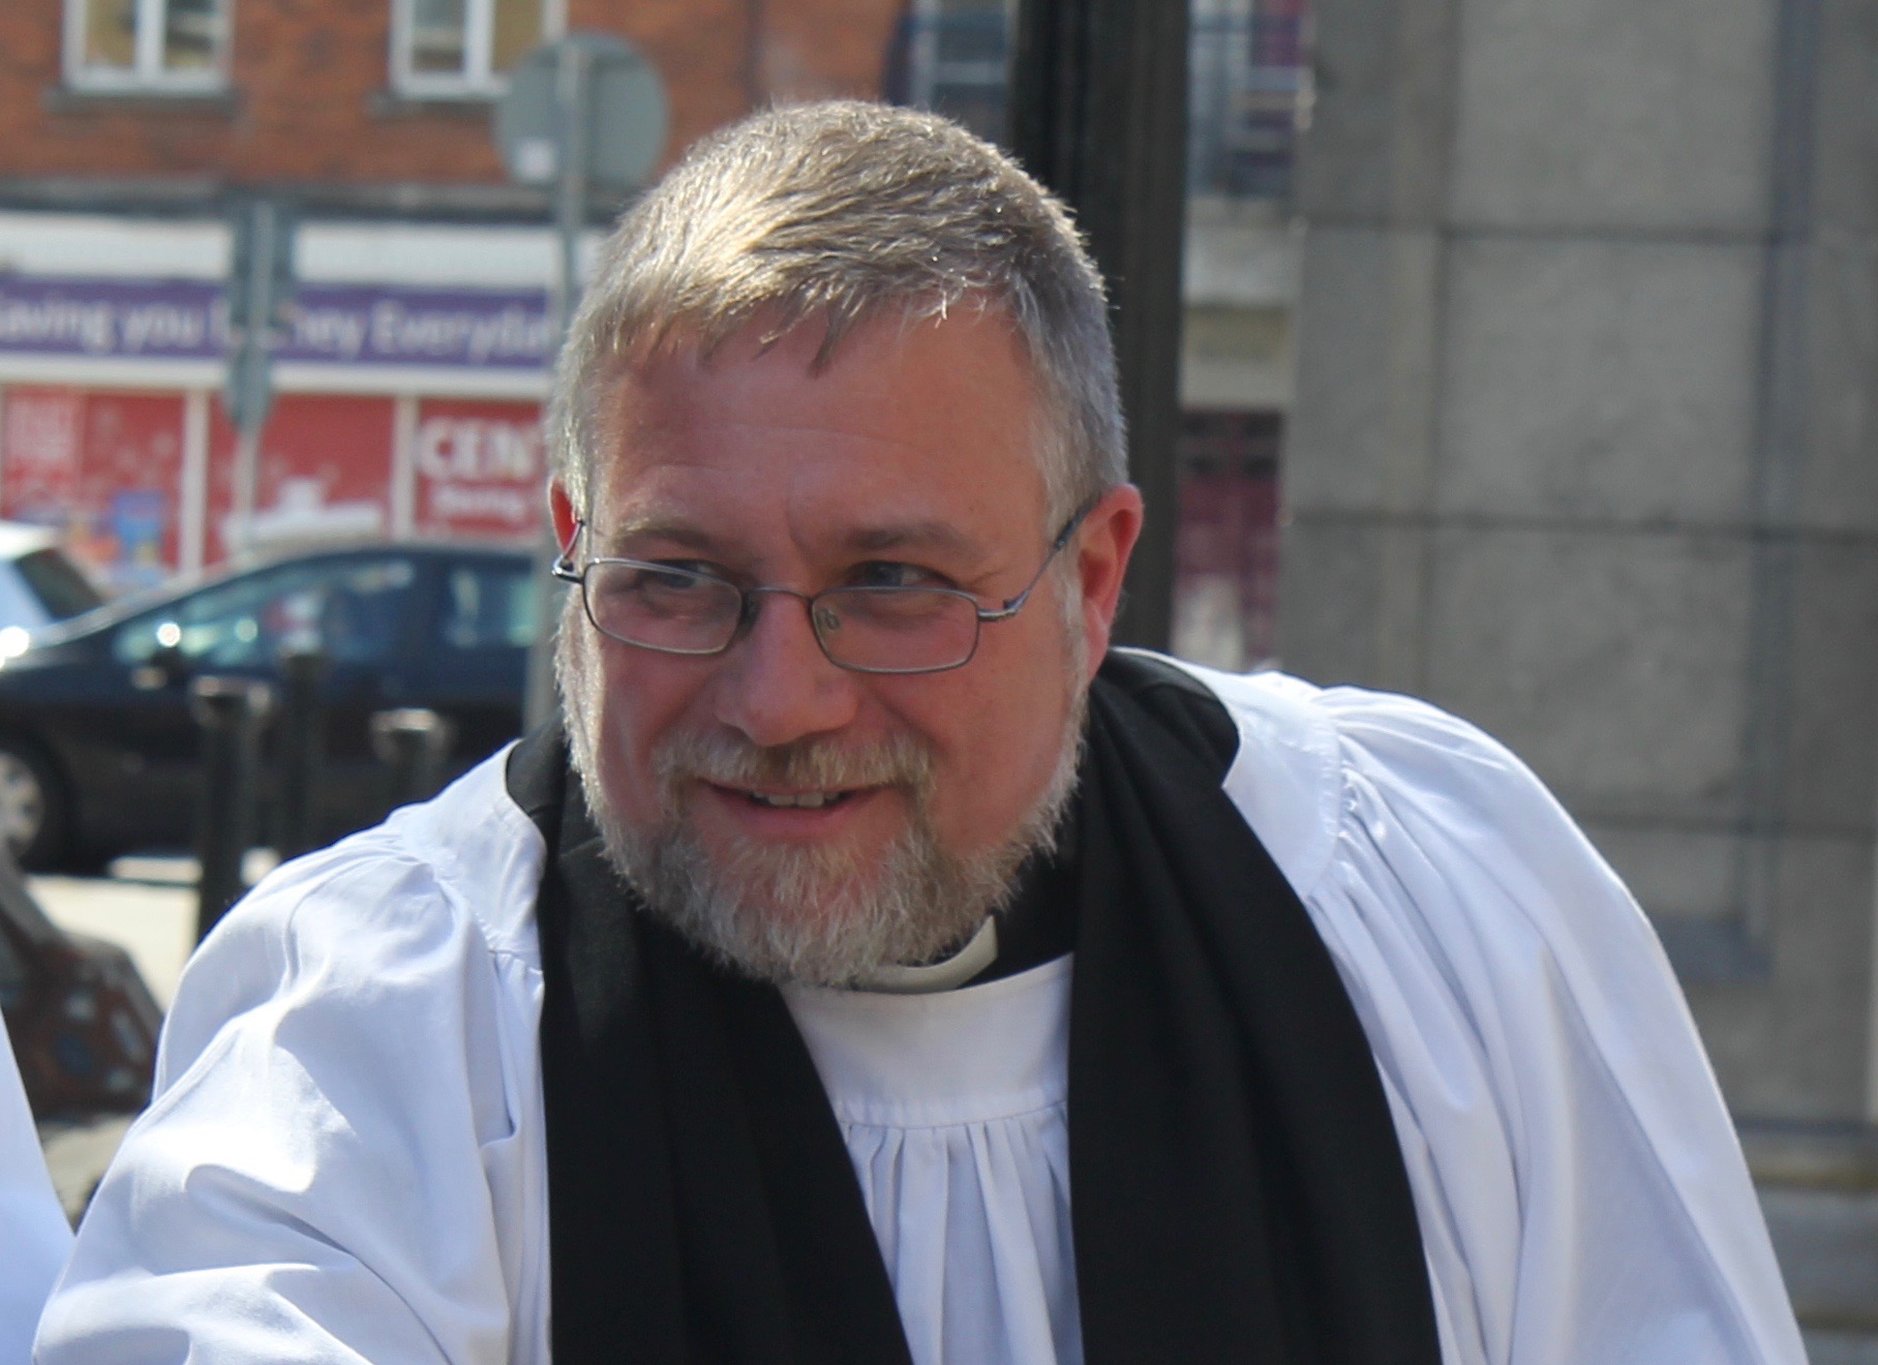 The Revd David Oxley Elected to Chapter of St Patrick’s Cathedral